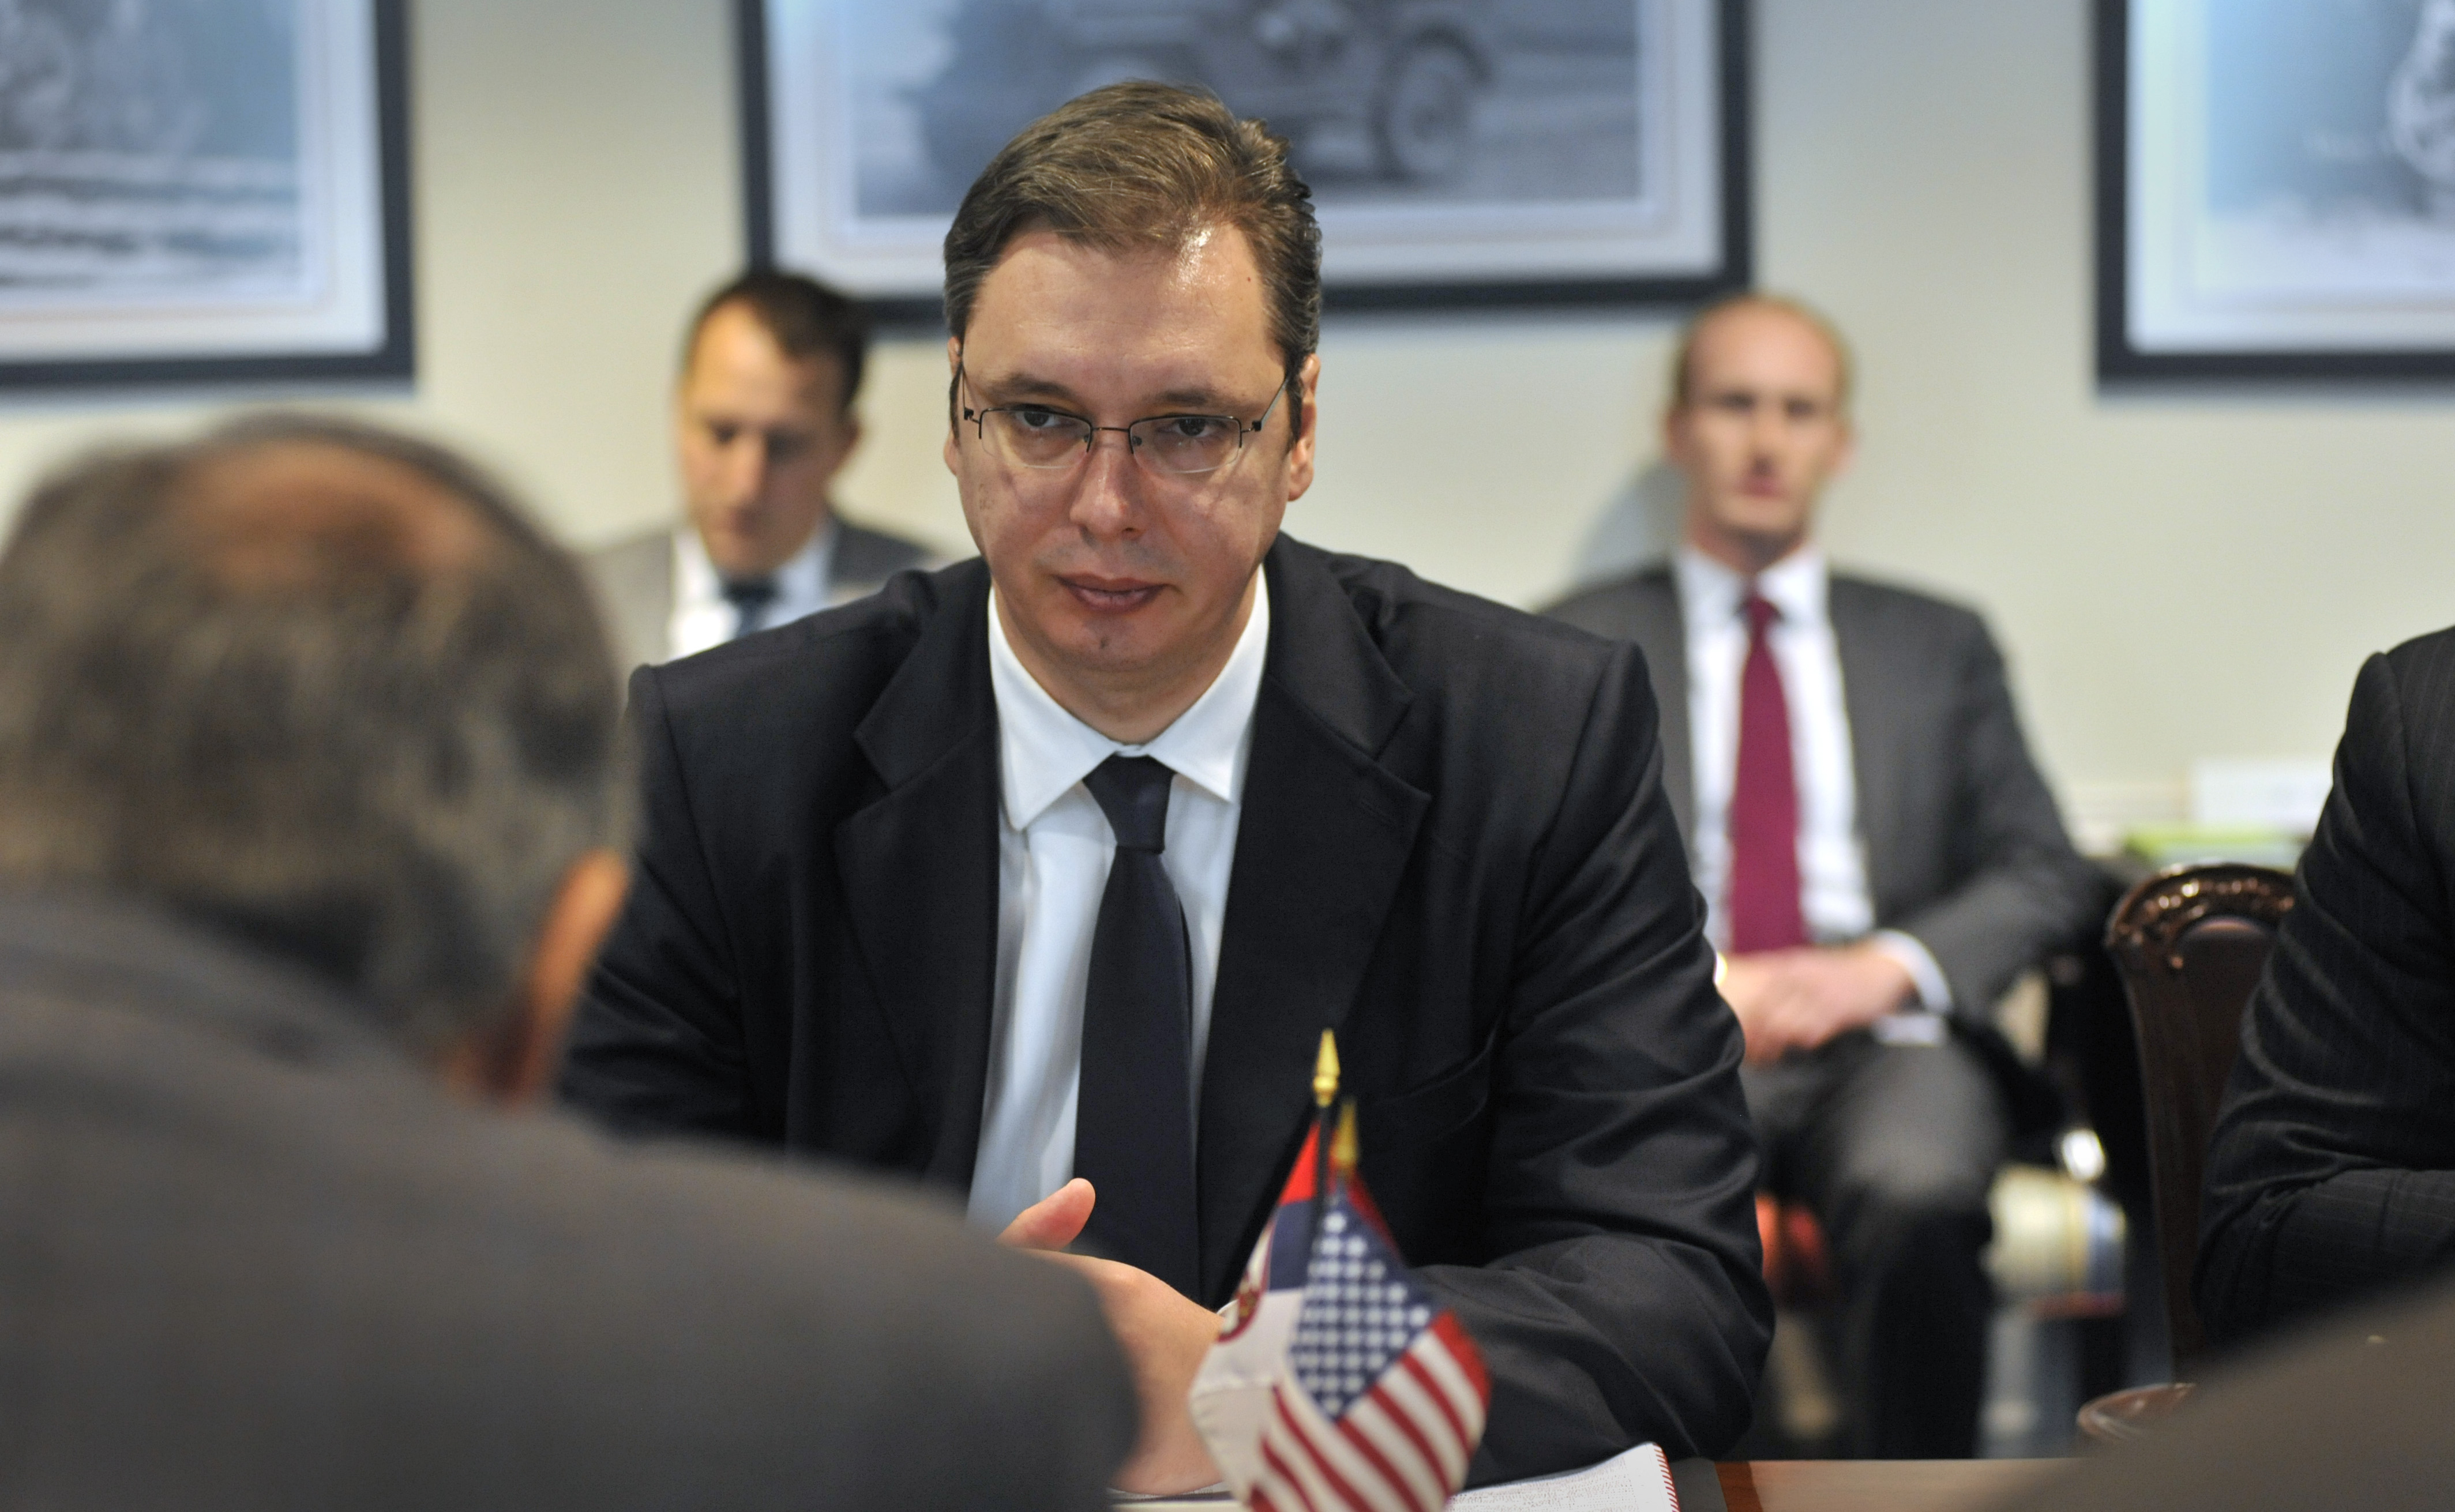 Bosnian Serbs ask Vucic to tie their region's independence to Kosovo talks